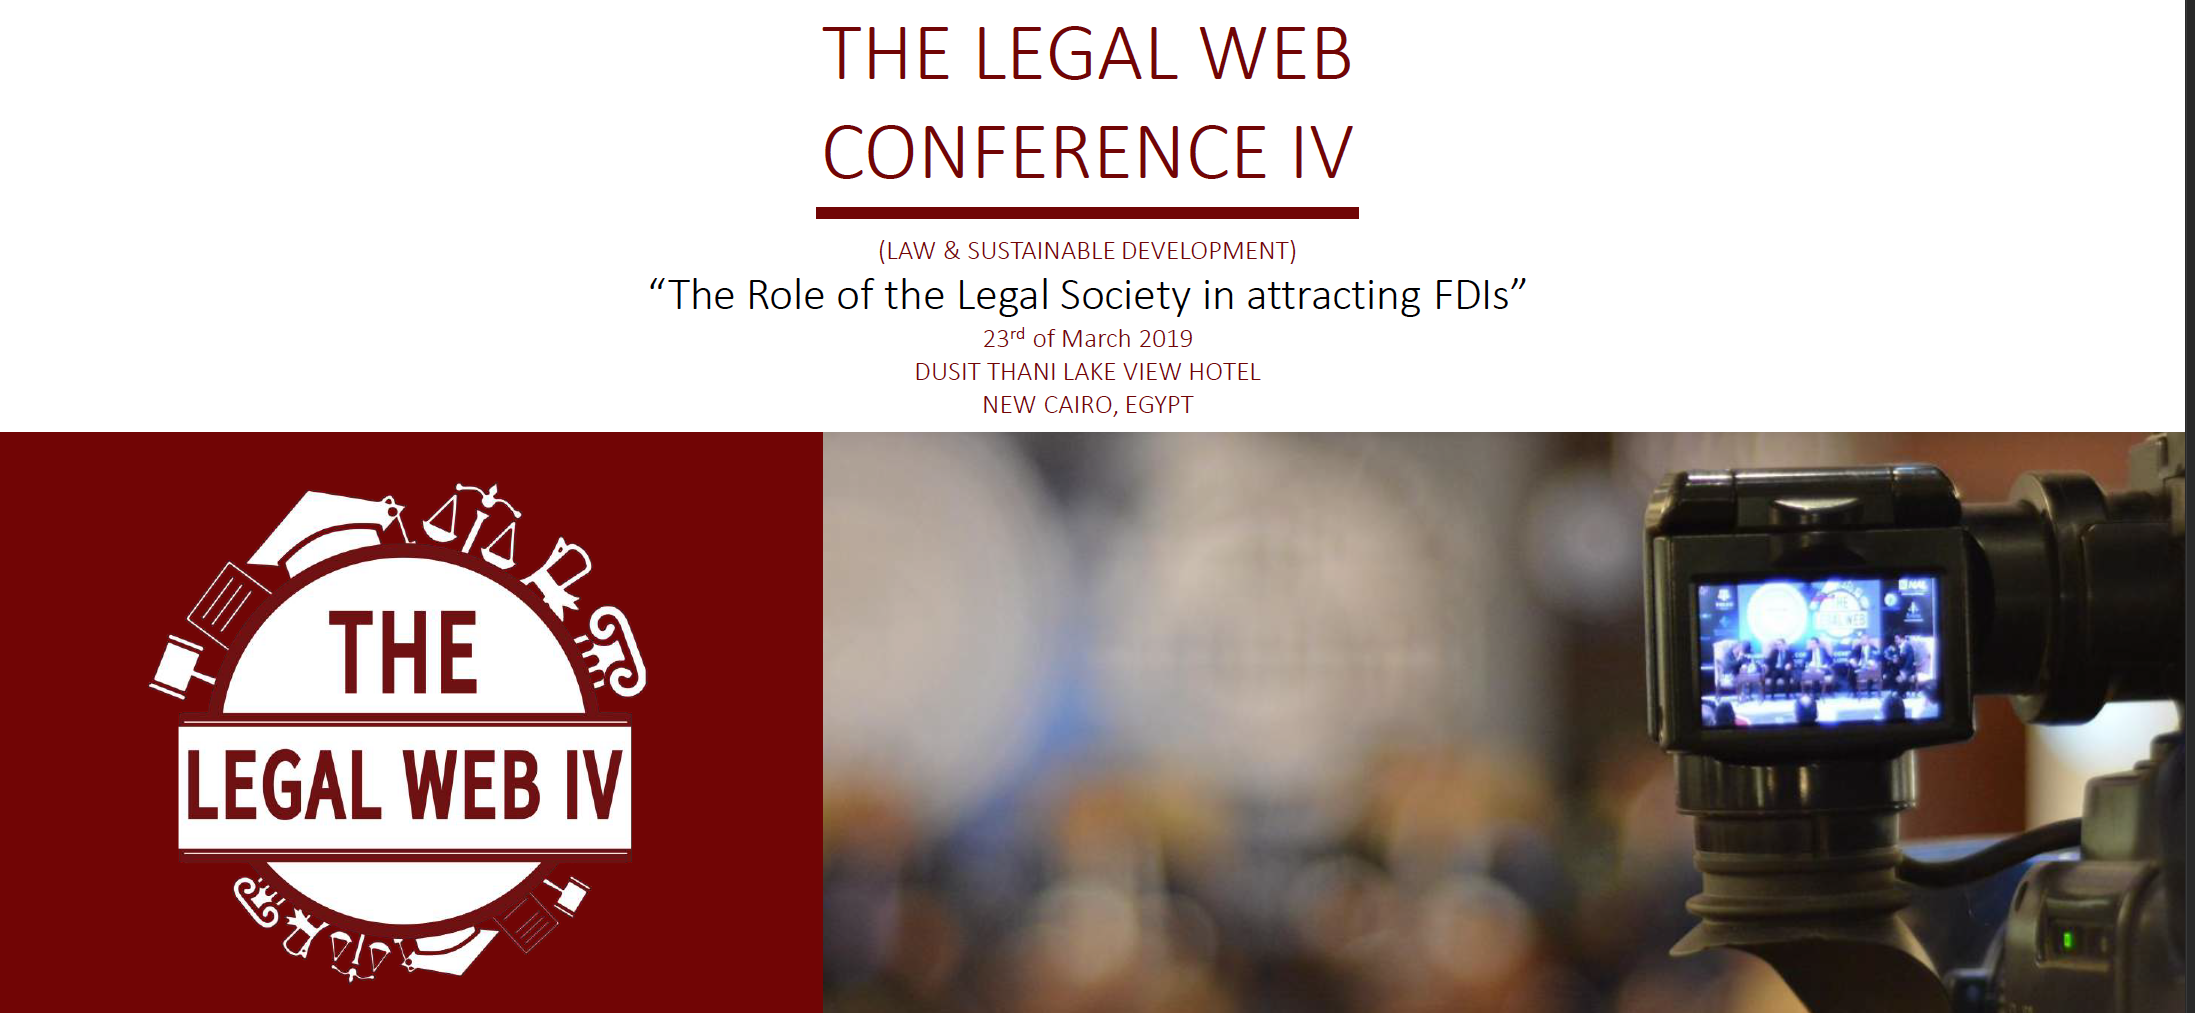 RISC Hosts Its 4th Annual Legal Web Conference This Month